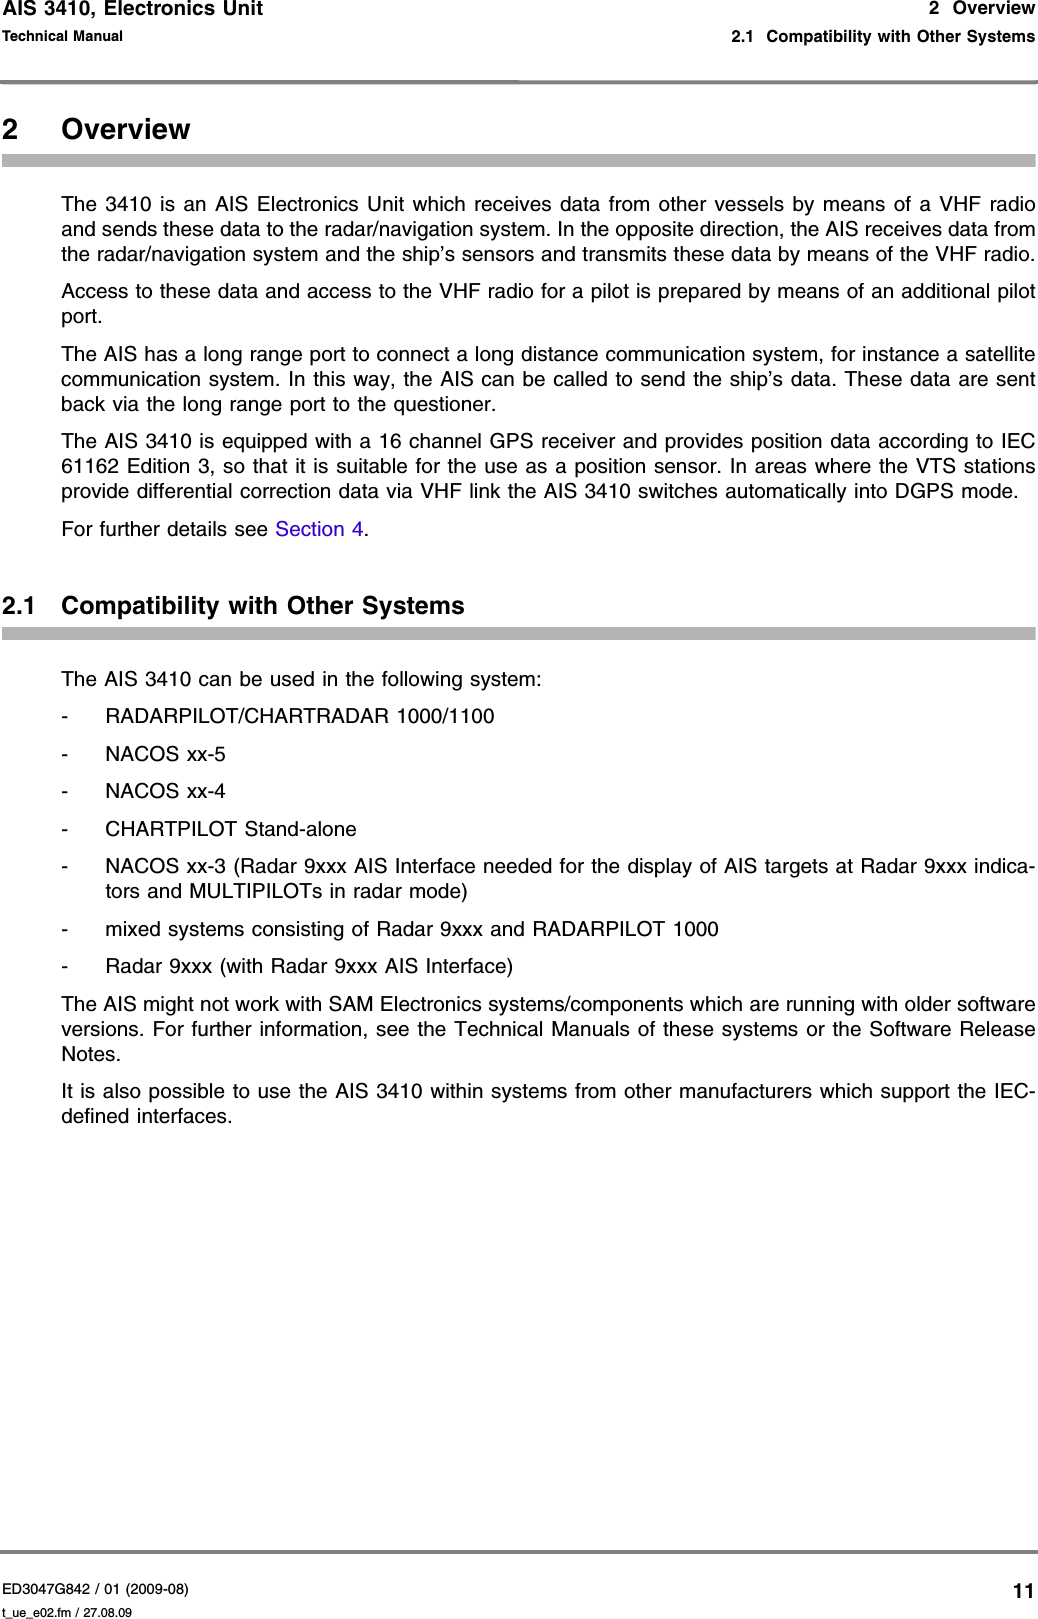 AIS 3410, Electronics UnitED3047G842 / 01 (2009-08)Technical Manual2  Overview2.1  Compatibility with Other Systemst_ue_e02.fm / 27.08.09112OverviewThe 3410 is an AIS Electronics Unit which receives data from other vessels by means of a VHF radio and sends these data to the radar/navigation system. In the opposite direction, the AIS receives data from the radar/navigation system and the ship’s sensors and transmits these data by means of the VHF radio.Access to these data and access to the VHF radio for a pilot is prepared by means of an additional pilot port.The AIS has a long range port to connect a long distance communication system, for instance a satellite communication system. In this way, the AIS can be called to send the ship’s data. These data are sent back via the long range port to the questioner.The AIS 3410 is equipped with a 16 channel GPS receiver and provides position data according to IEC 61162 Edition 3, so that it is suitable for the use as a position sensor. In areas where the VTS stations provide differential correction data via VHF link the AIS 3410 switches automatically into DGPS mode.For further details see Section 4.2.1 Compatibility with Other SystemsThe AIS 3410 can be used in the following system:- RADARPILOT/CHARTRADAR 1000/1100-NACOS xx-5-NACOS xx-4- CHARTPILOT Stand-alone- NACOS xx-3 (Radar 9xxx AIS Interface needed for the display of AIS targets at Radar 9xxx indica-tors and MULTIPILOTs in radar mode)- mixed systems consisting of Radar 9xxx and RADARPILOT 1000- Radar 9xxx (with Radar 9xxx AIS Interface)The AIS might not work with SAM Electronics systems/components which are running with older software versions. For further information, see the Technical Manuals of these systems or the Software Release Notes.It is also possible to use the AIS 3410 within systems from other manufacturers which support the IEC-defined interfaces.